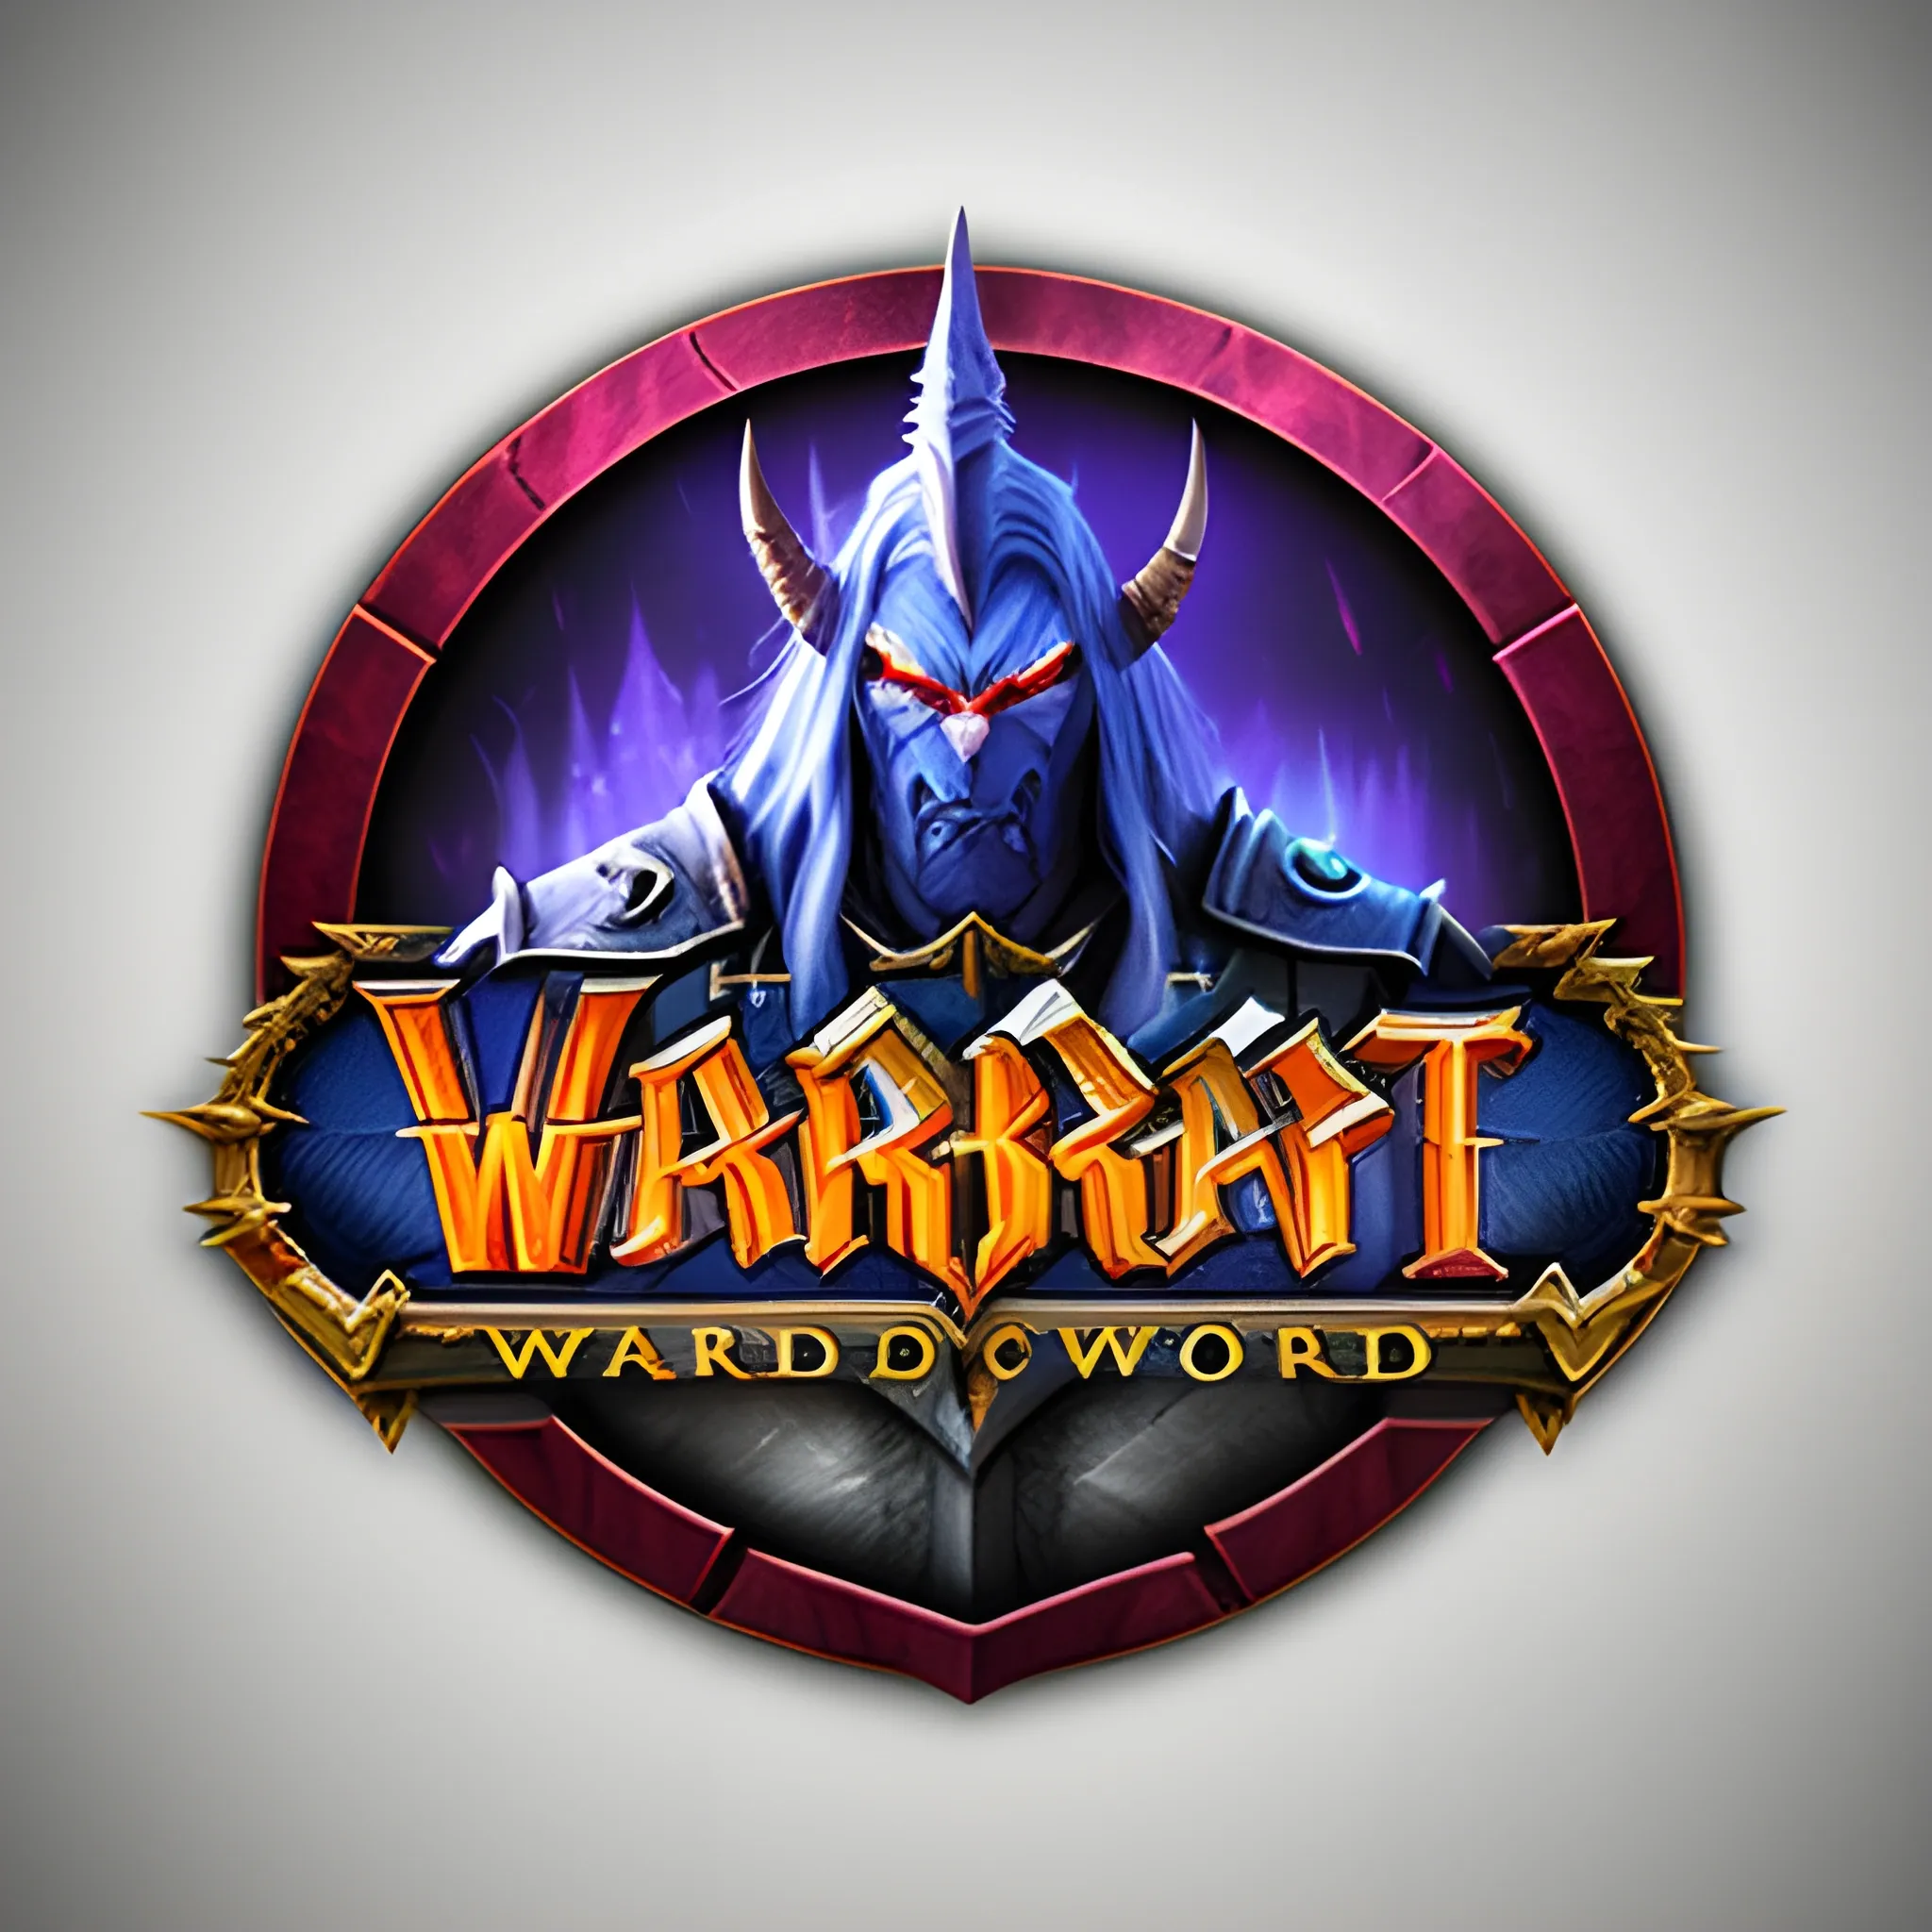 fun and childish professional logo with the words “logo design”,World of warcraft, 3d